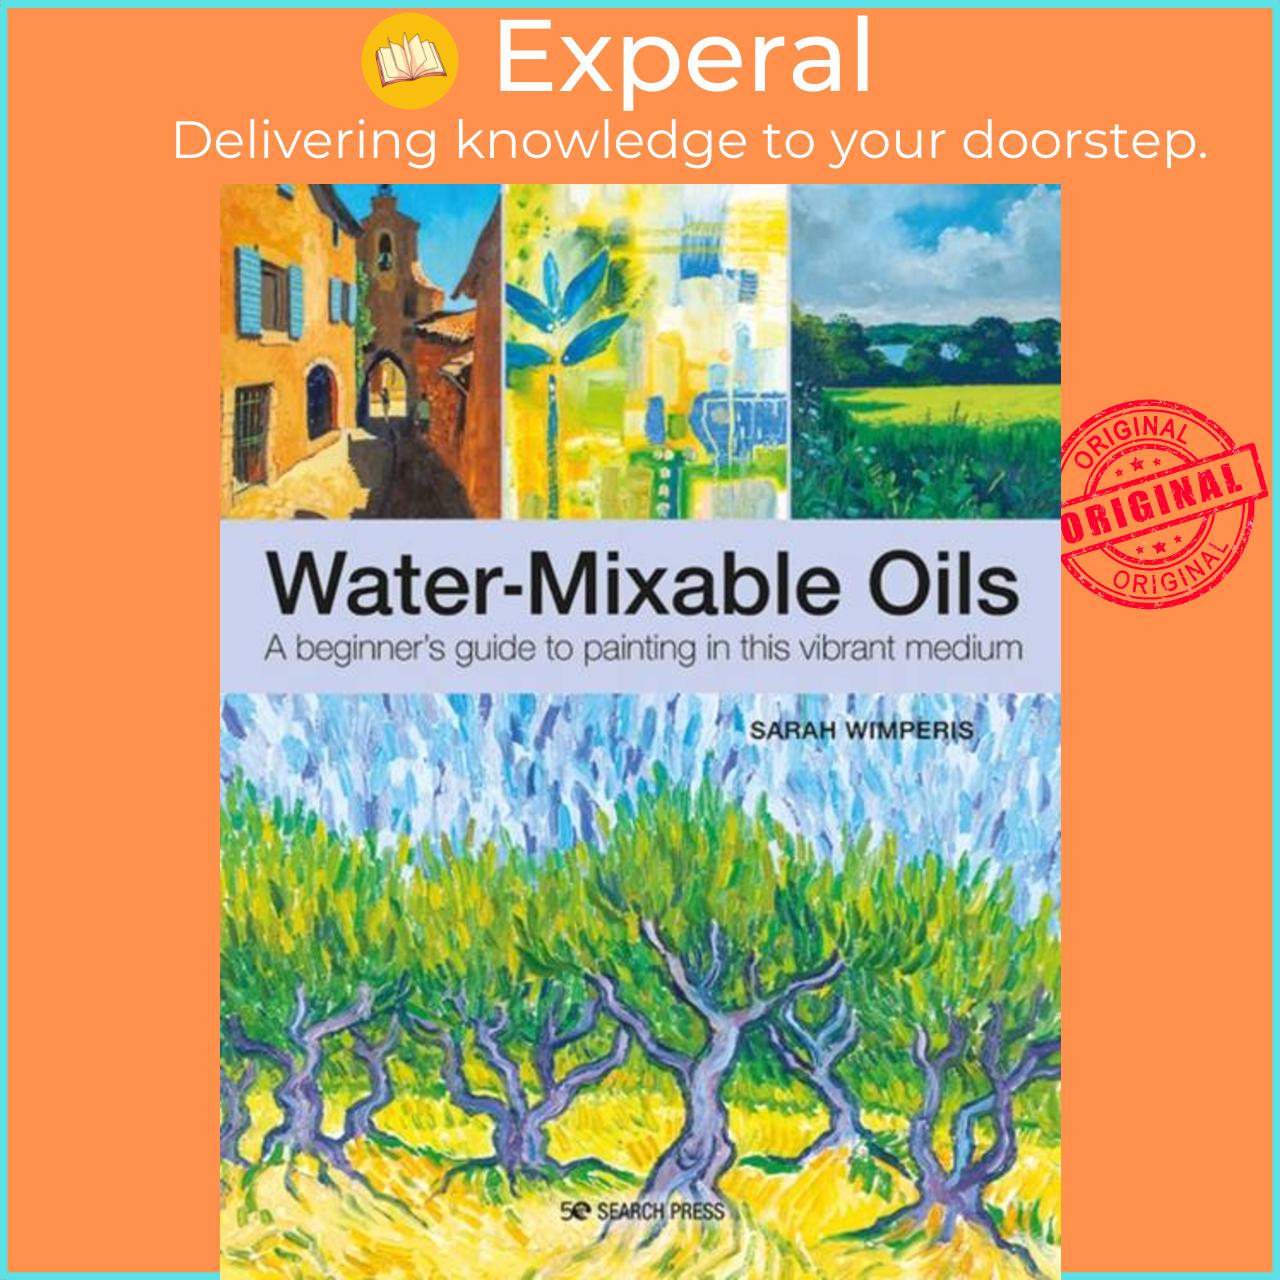 Sách - Water-Mixable Oils - A Beginner's Guide to Painting in This Vibrant Med by Sarah Wimperis (UK edition, paperback)